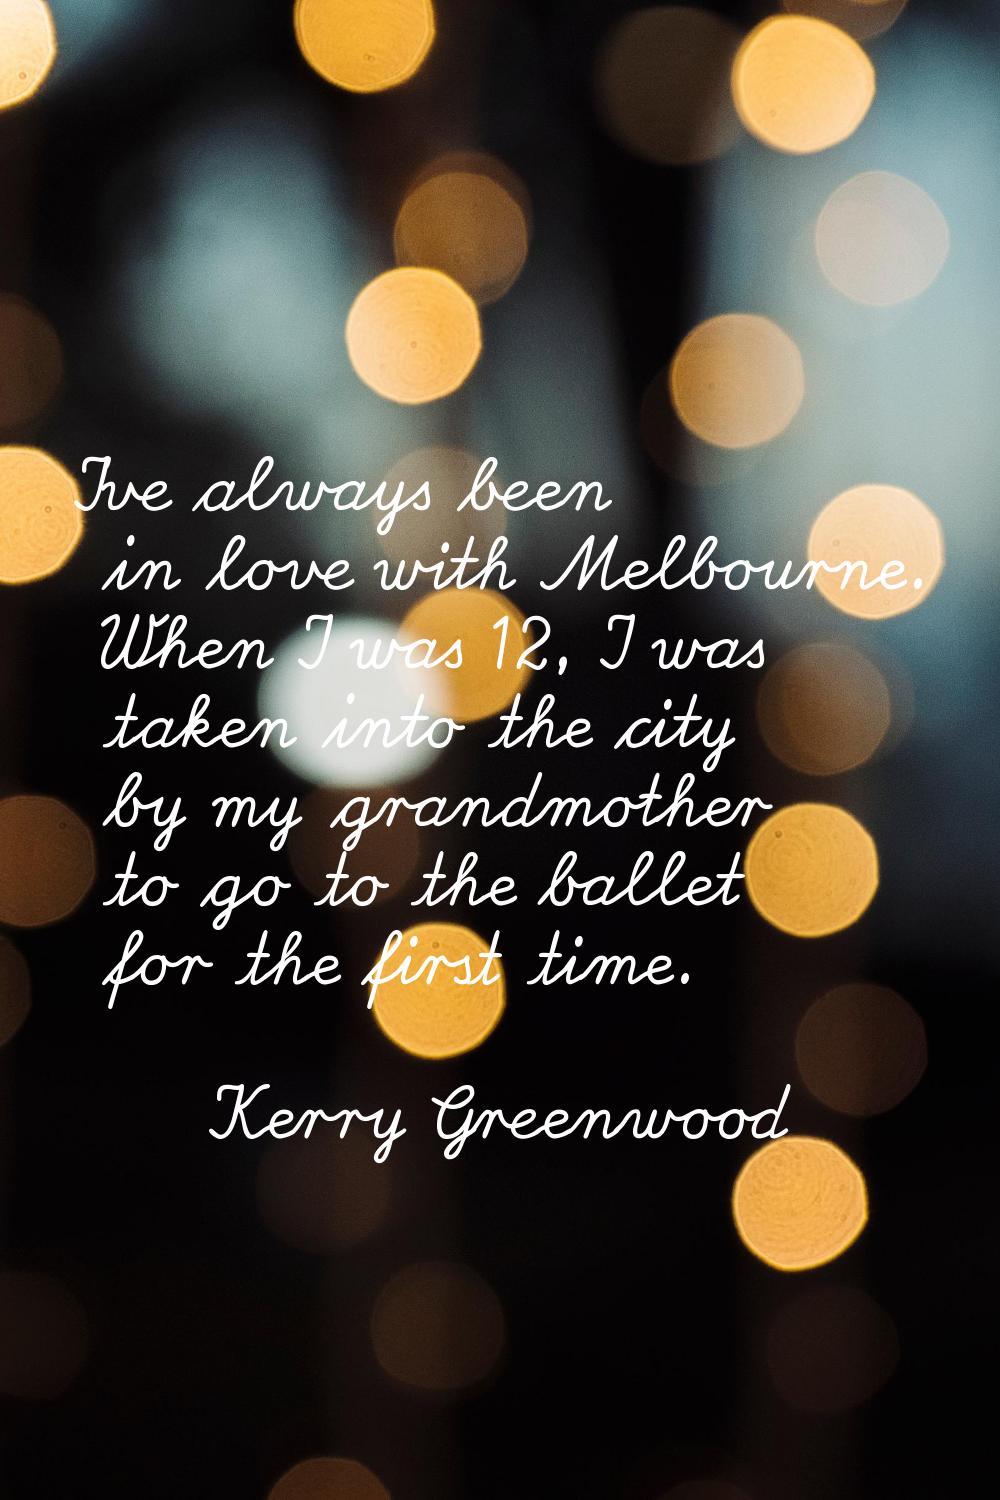 I've always been in love with Melbourne. When I was 12, I was taken into the city by my grandmother